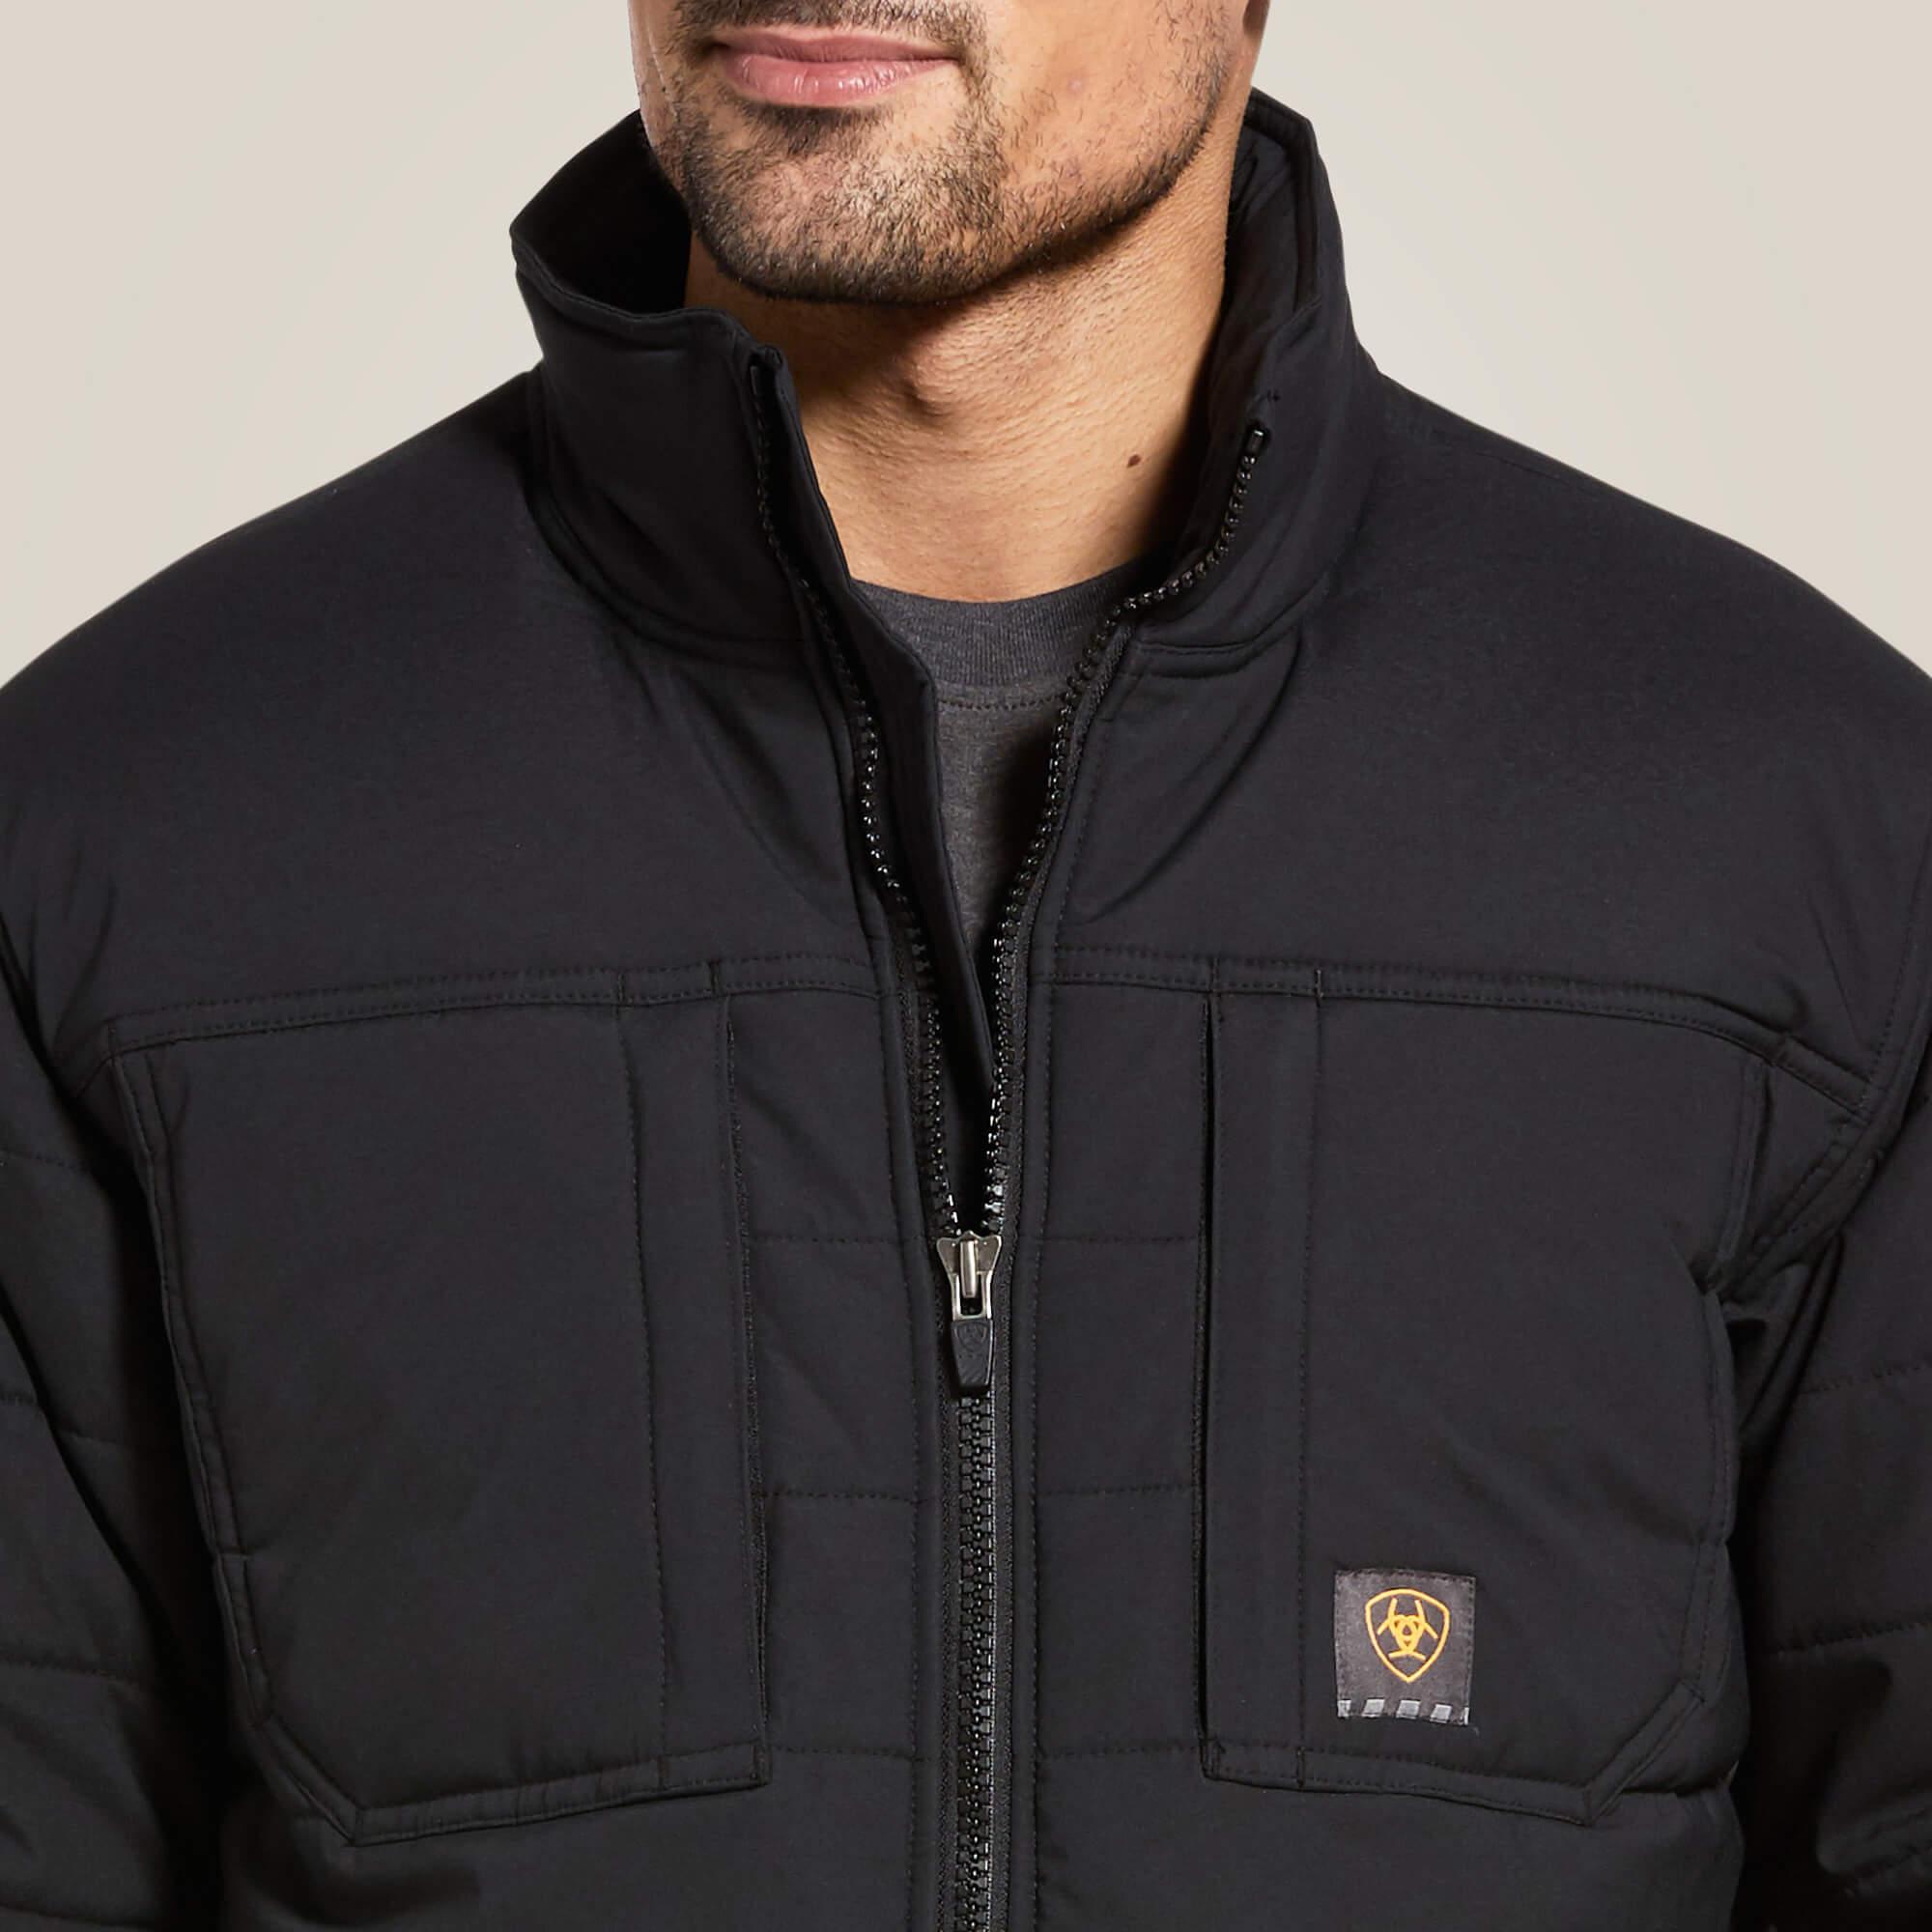 Rebar Valiant Stretch Canvas Water Resistant Insulated Jacket - Black - Purpose-Built / Home of the Trades